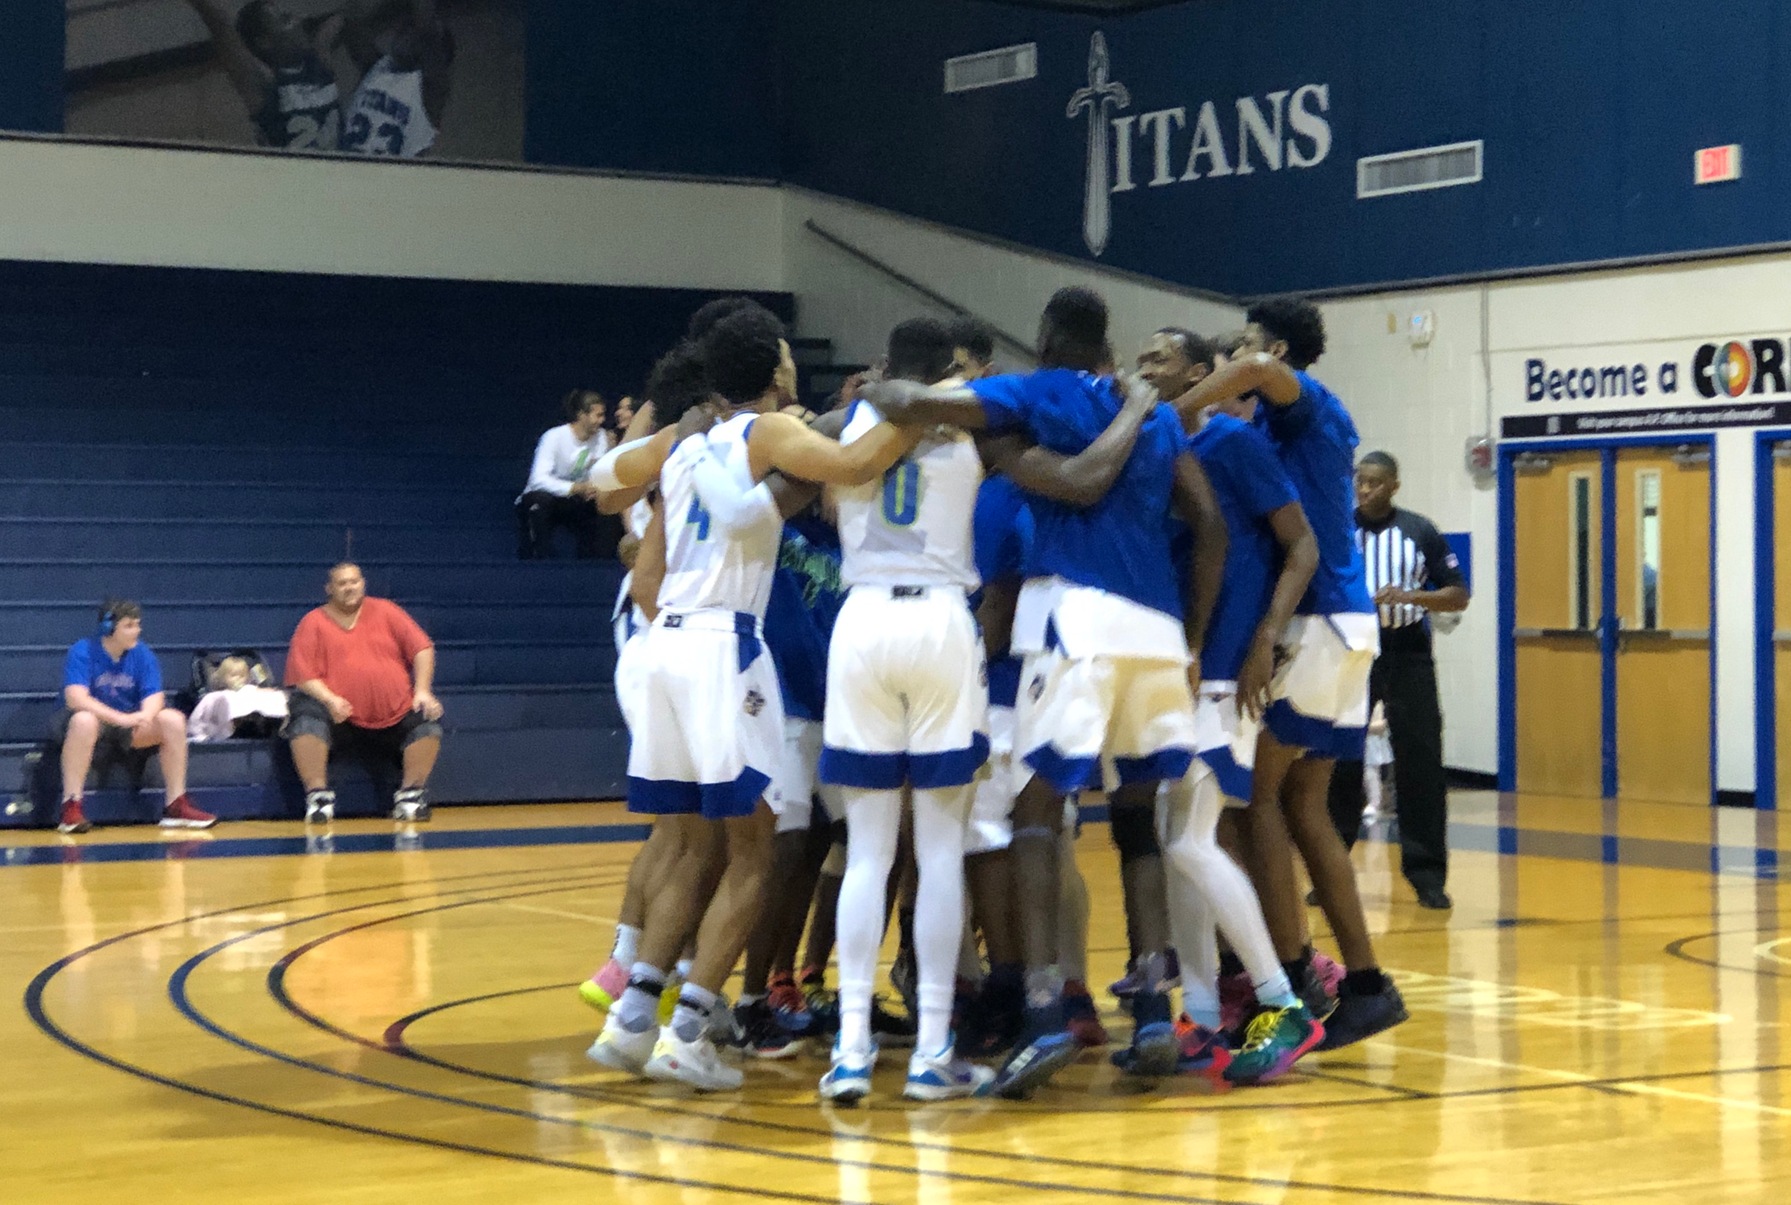 Men's basketball team punches ticket to state tournament with win